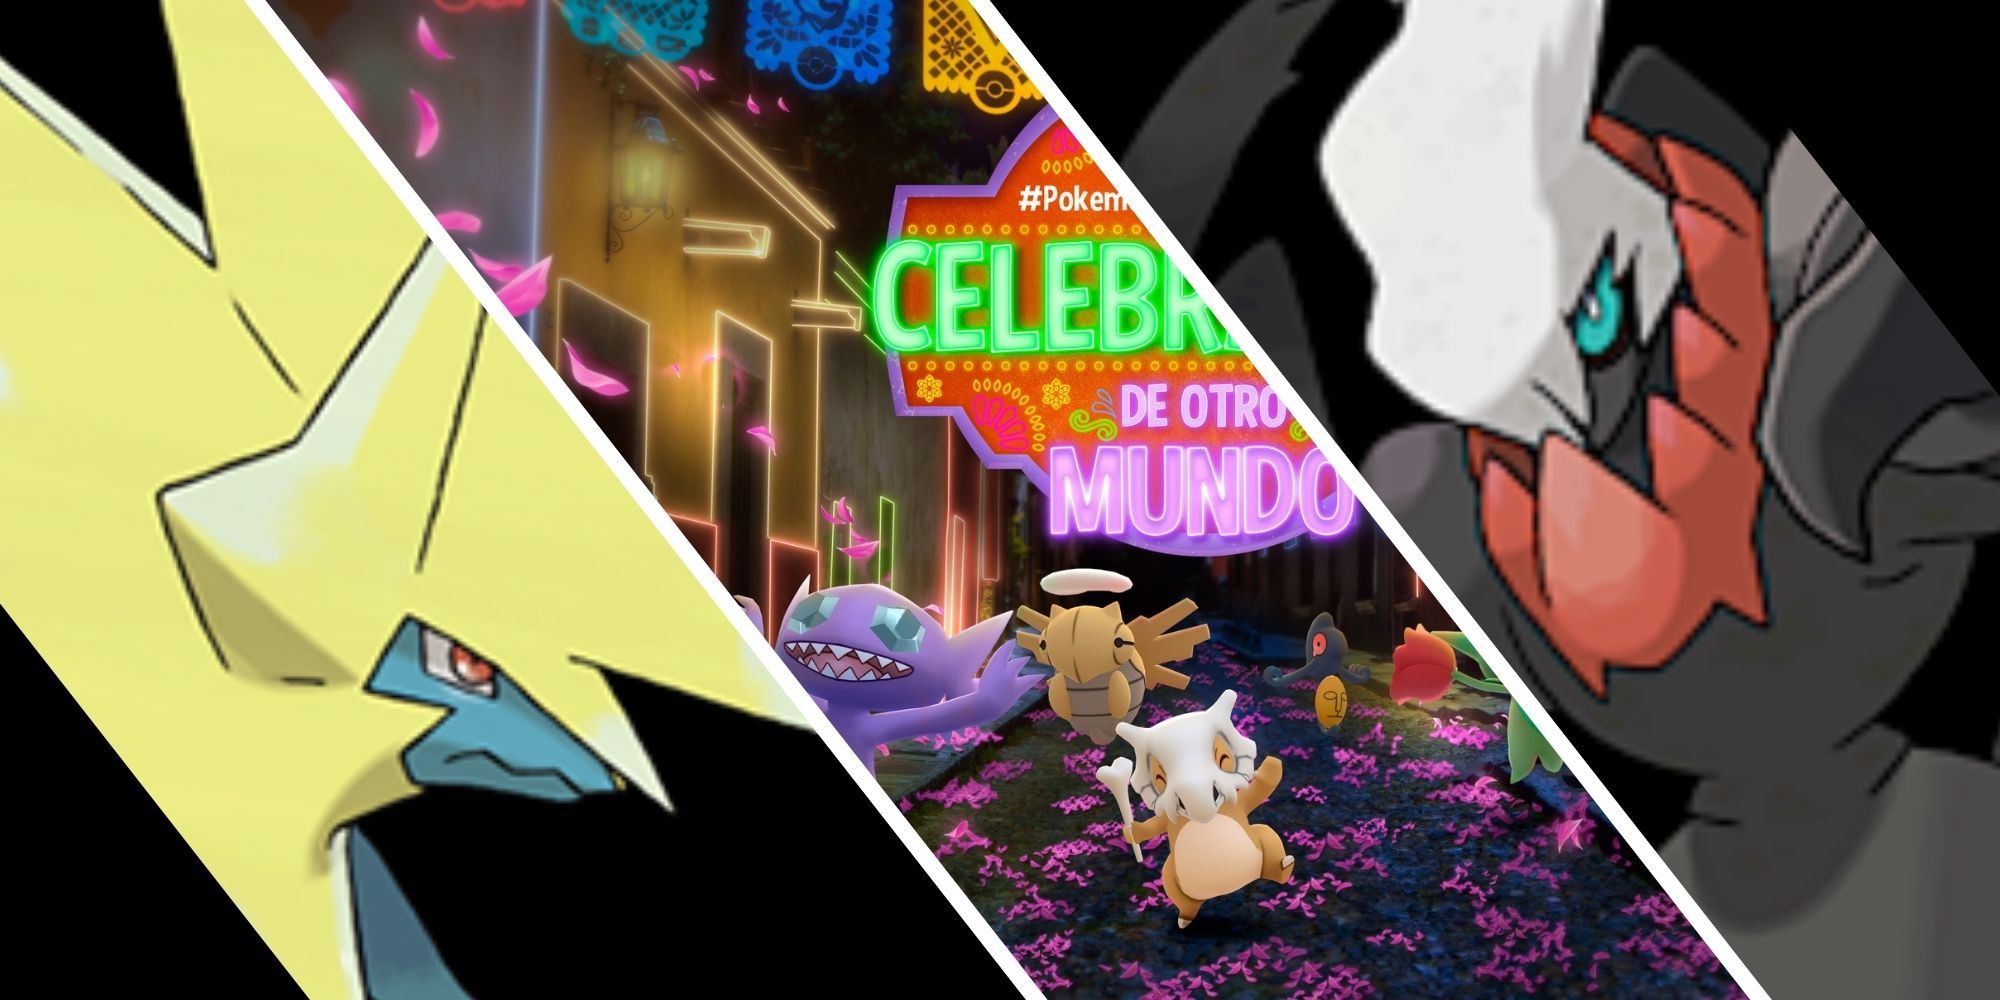 This Week In Pokemon Go Día de Muertos Festival of Lights New Raid Bosses And More